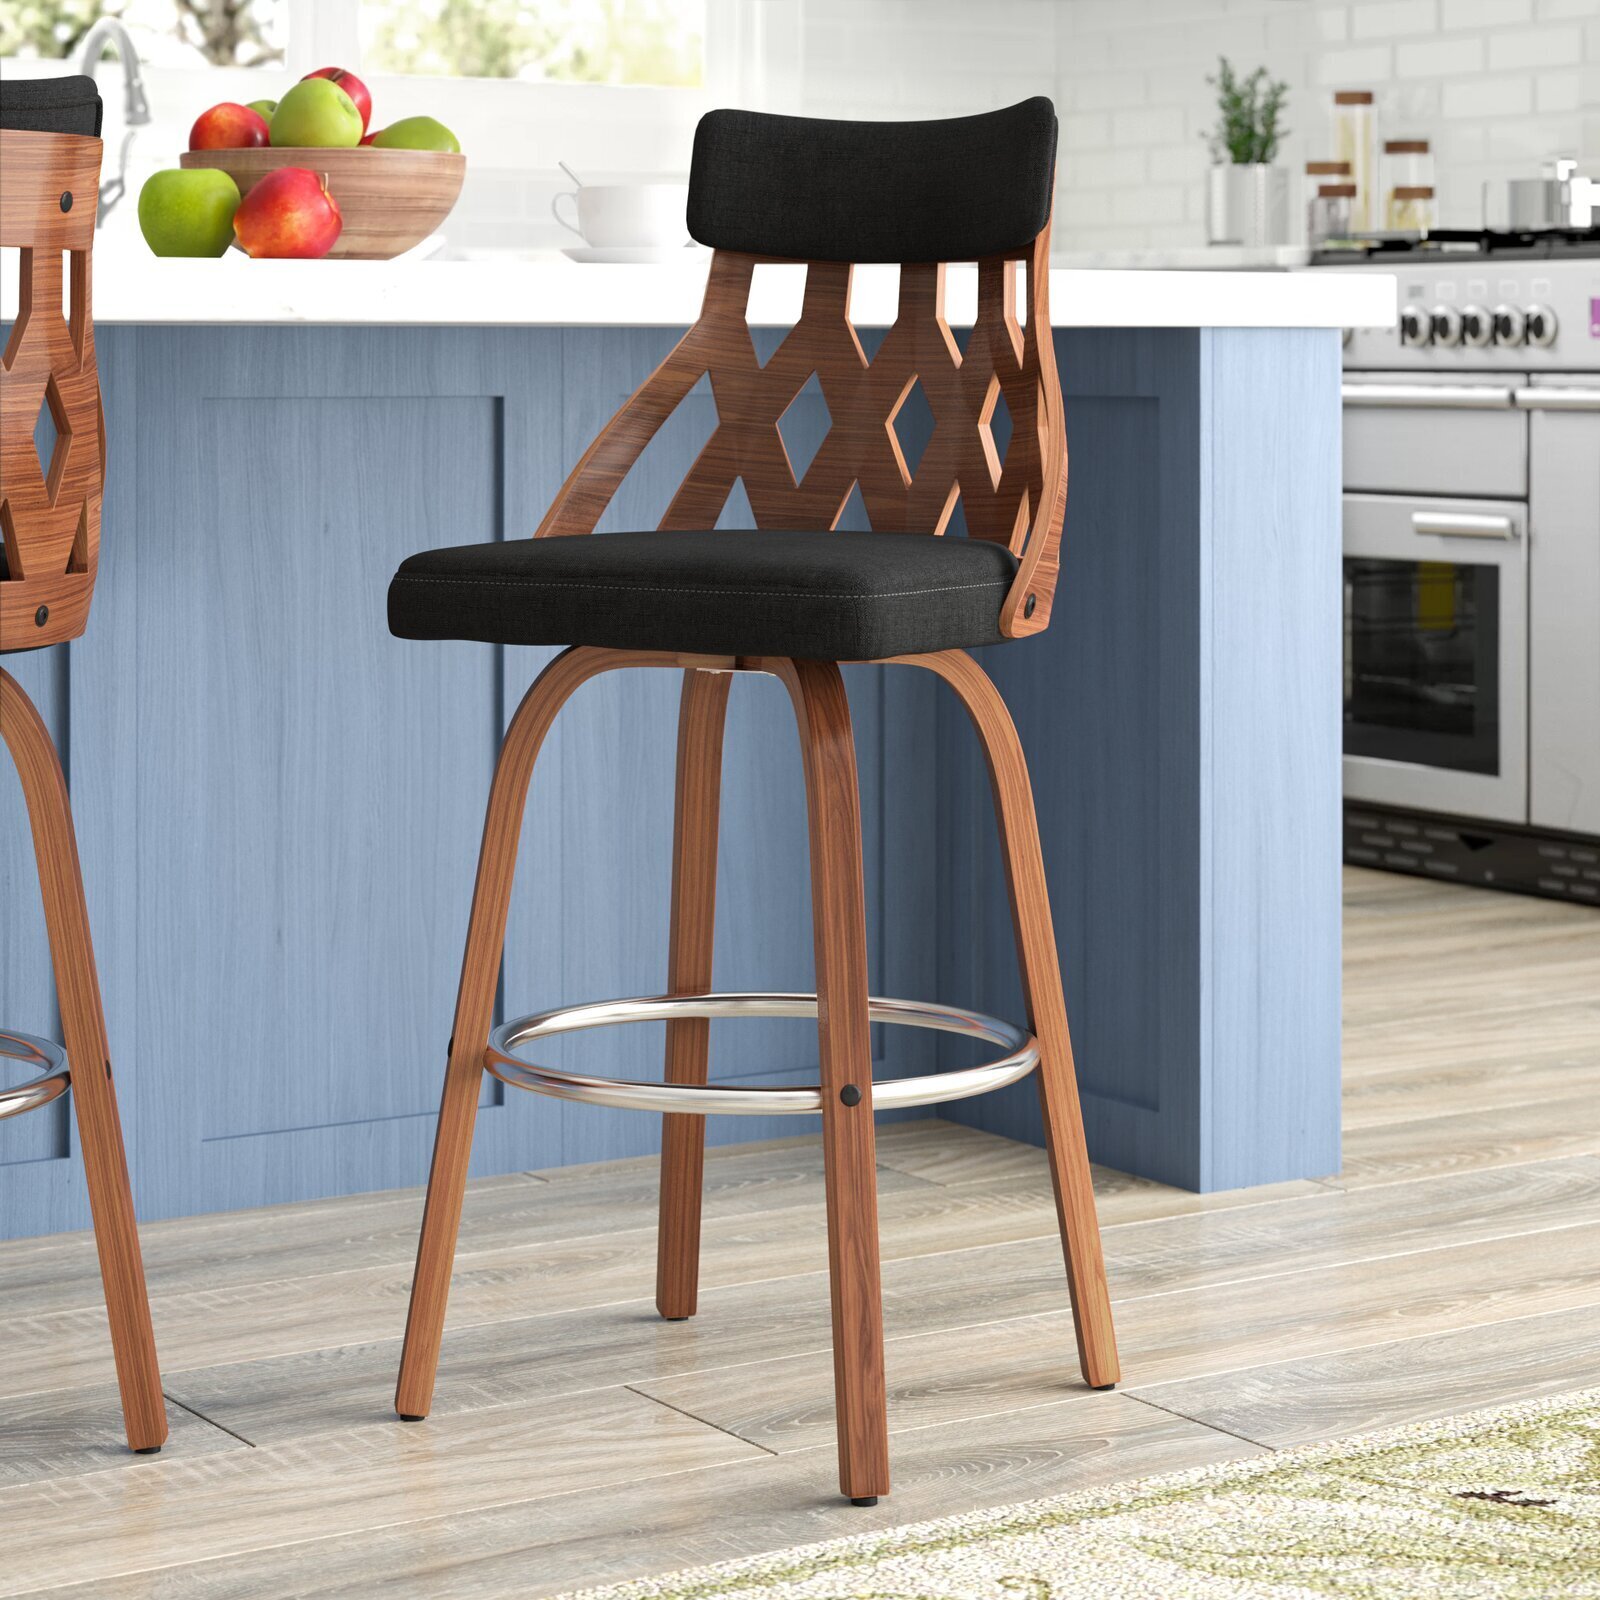 Padded Rustic Counter Height Stool